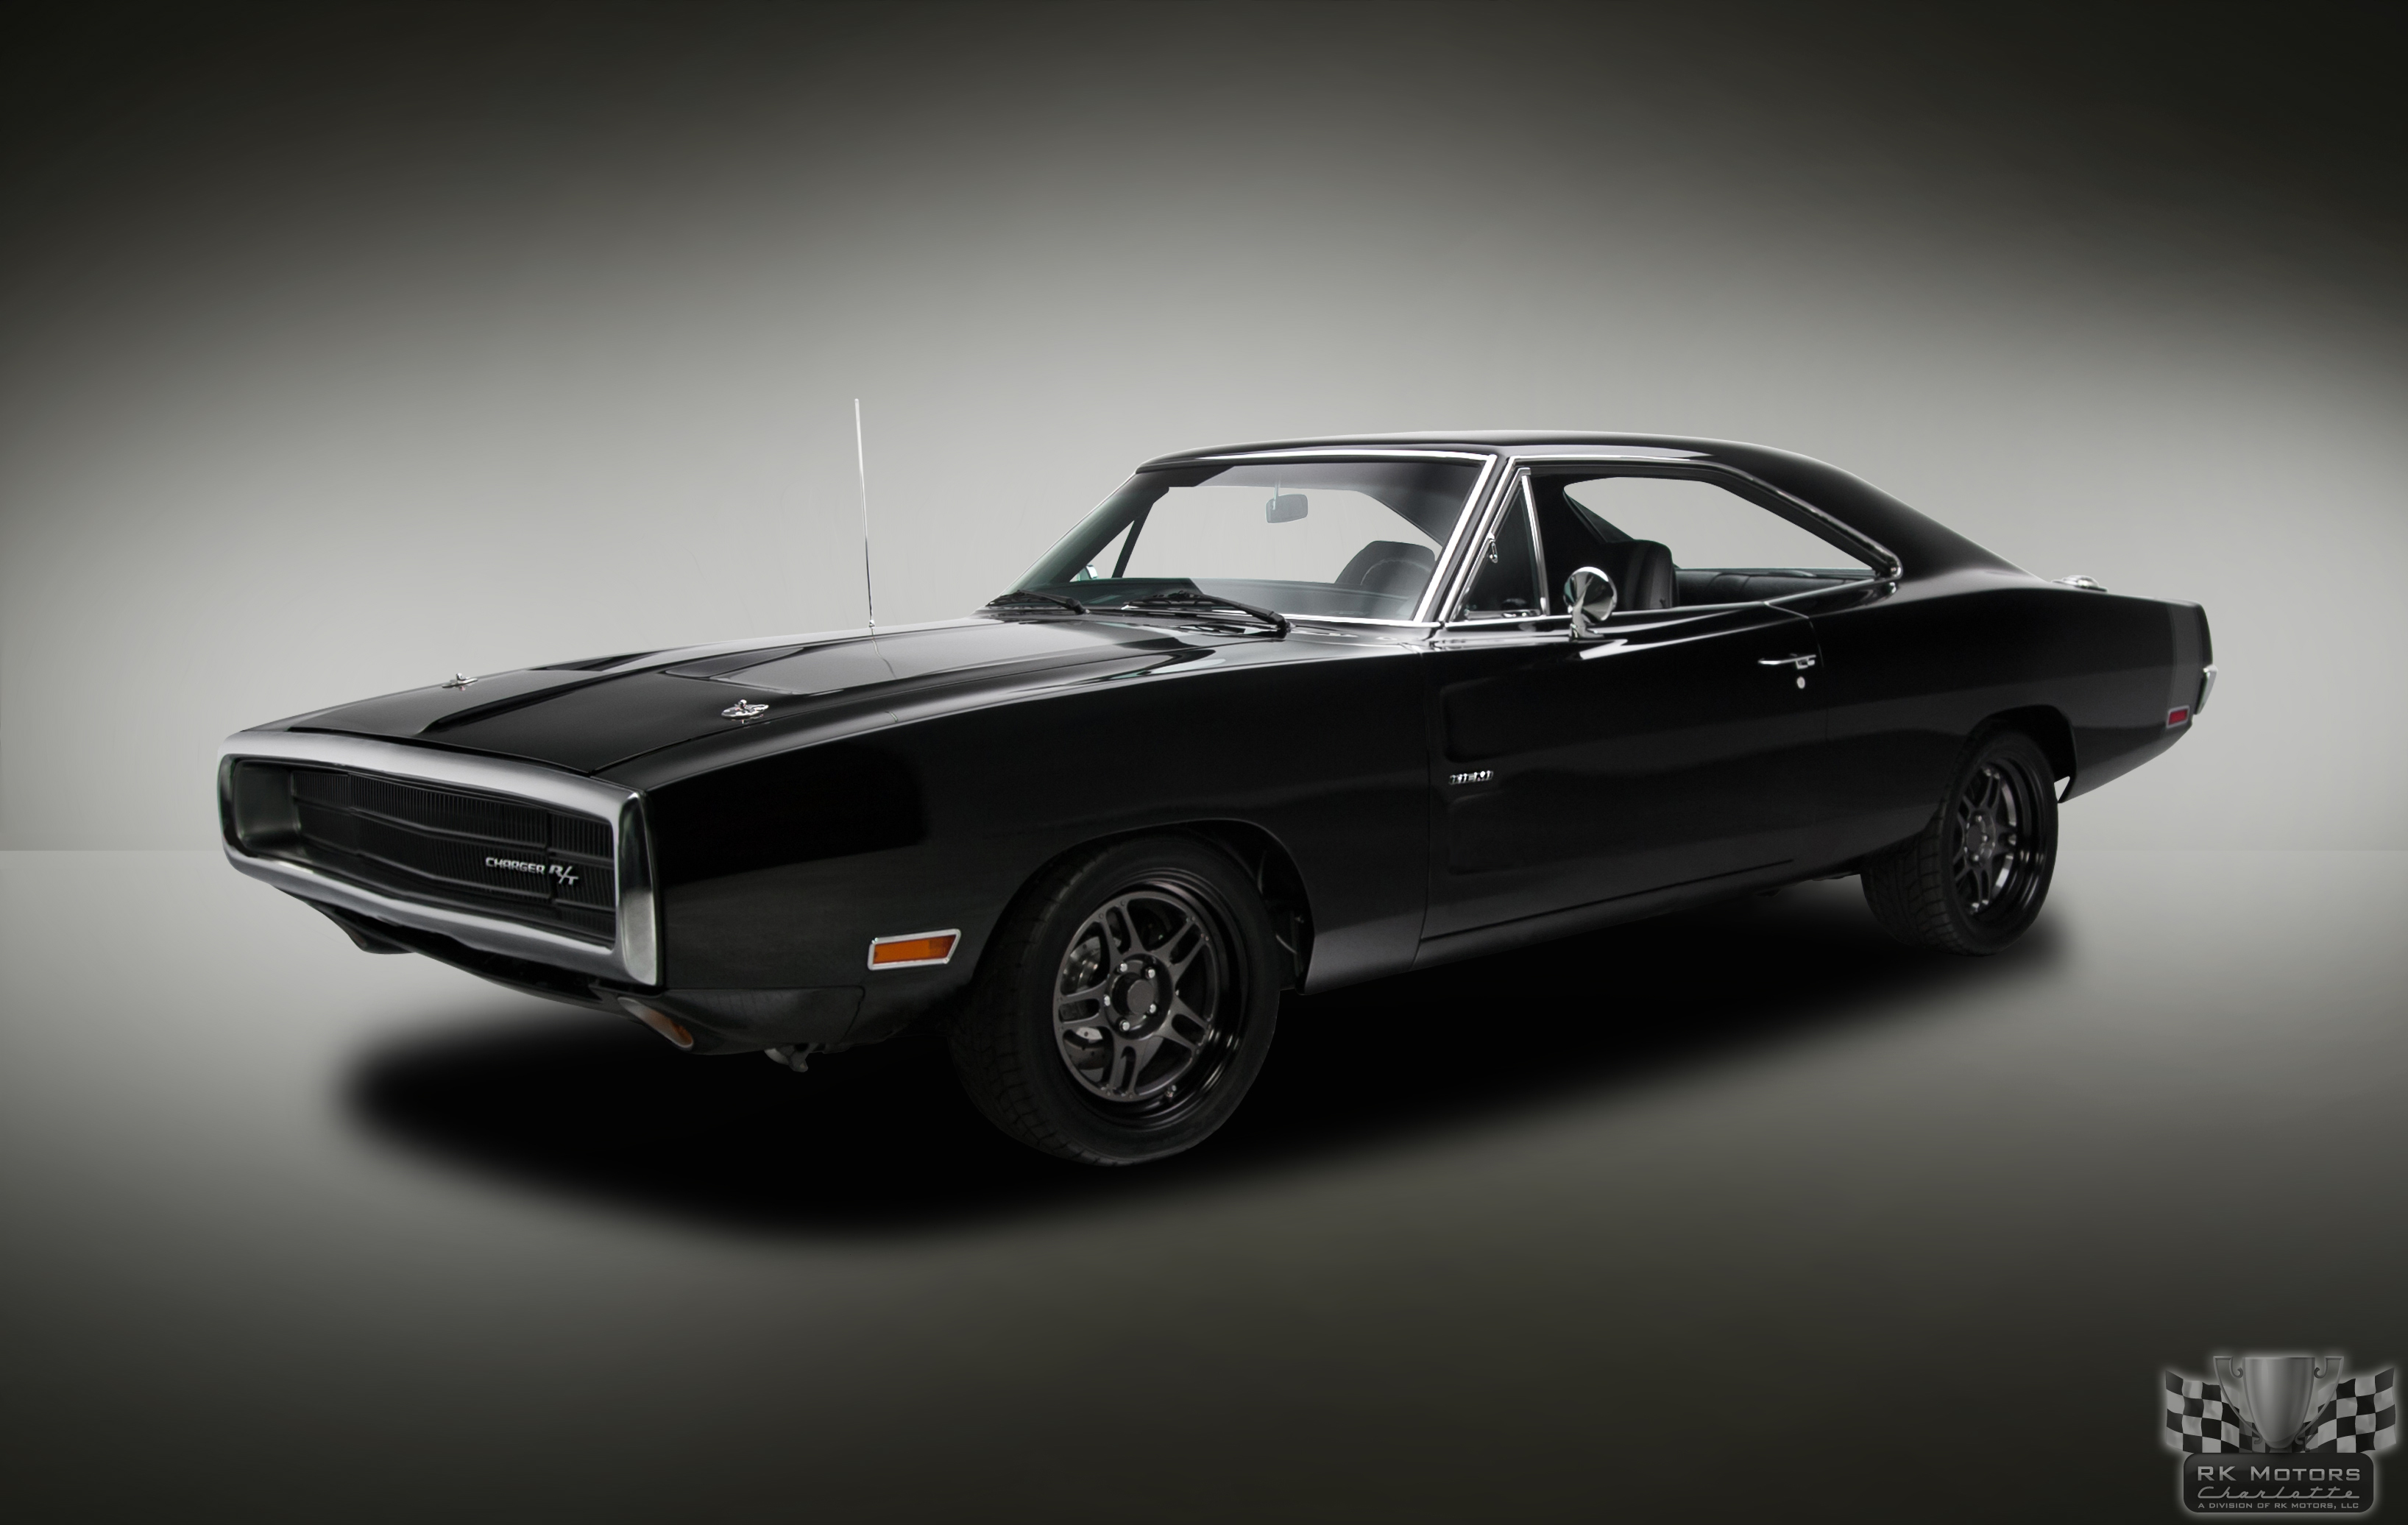 Charger R T Indy Hemi Muscle Cars Wallpaper